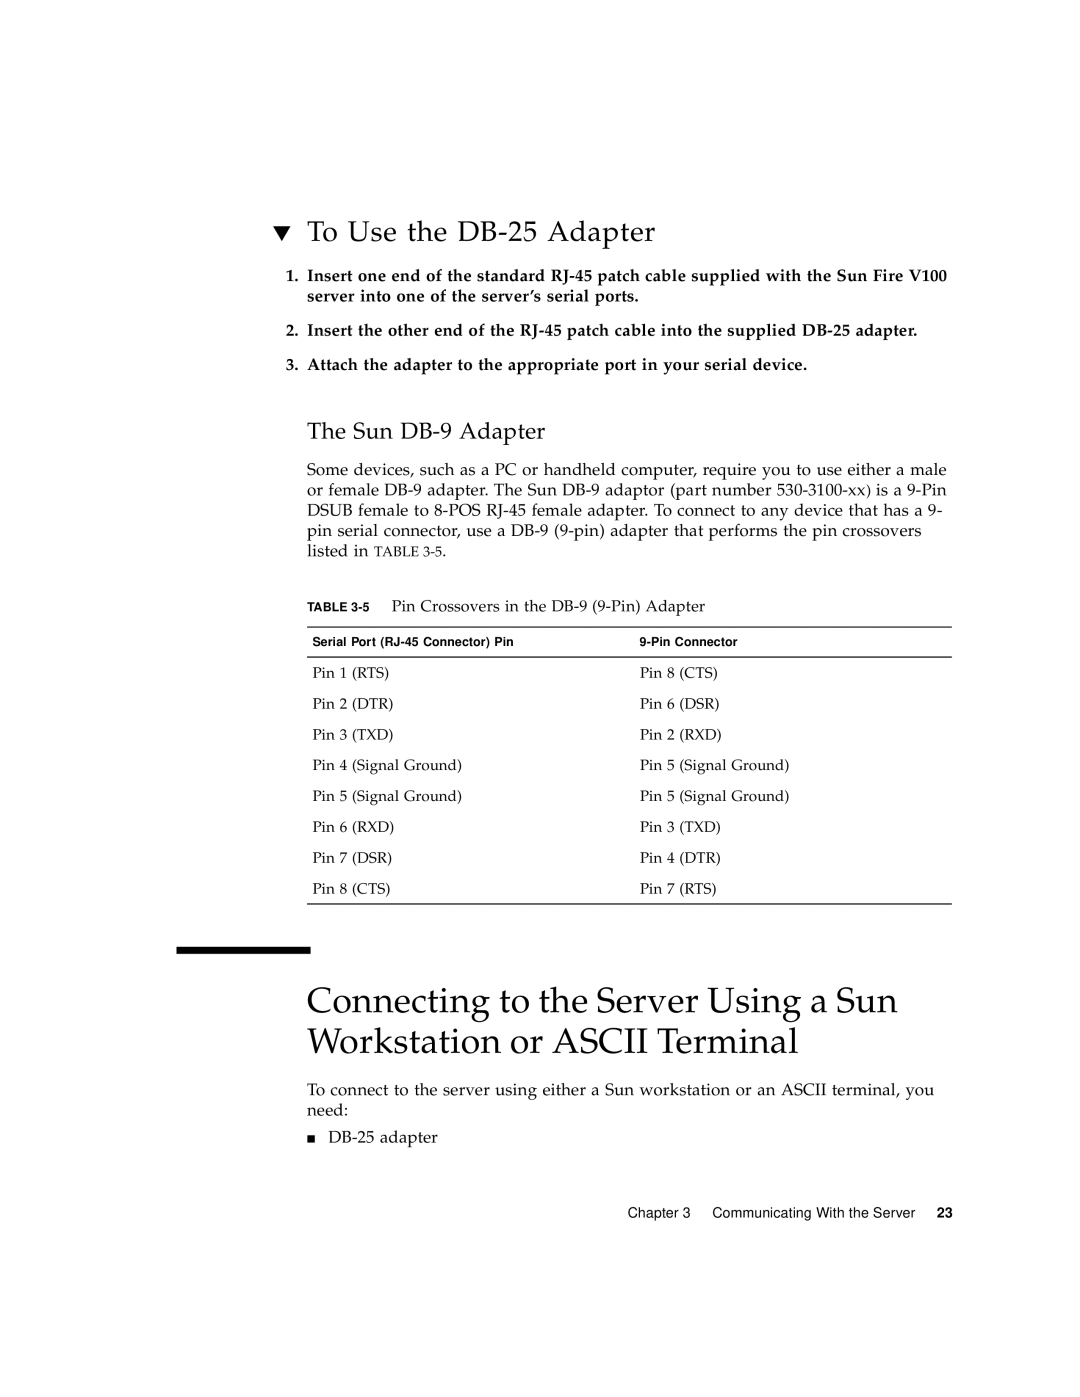 Sun Microsystems Sun Fire V100 Connecting to the Server Using a Sun Workstation or ASCII Terminal, The Sun DB-9 Adapter 